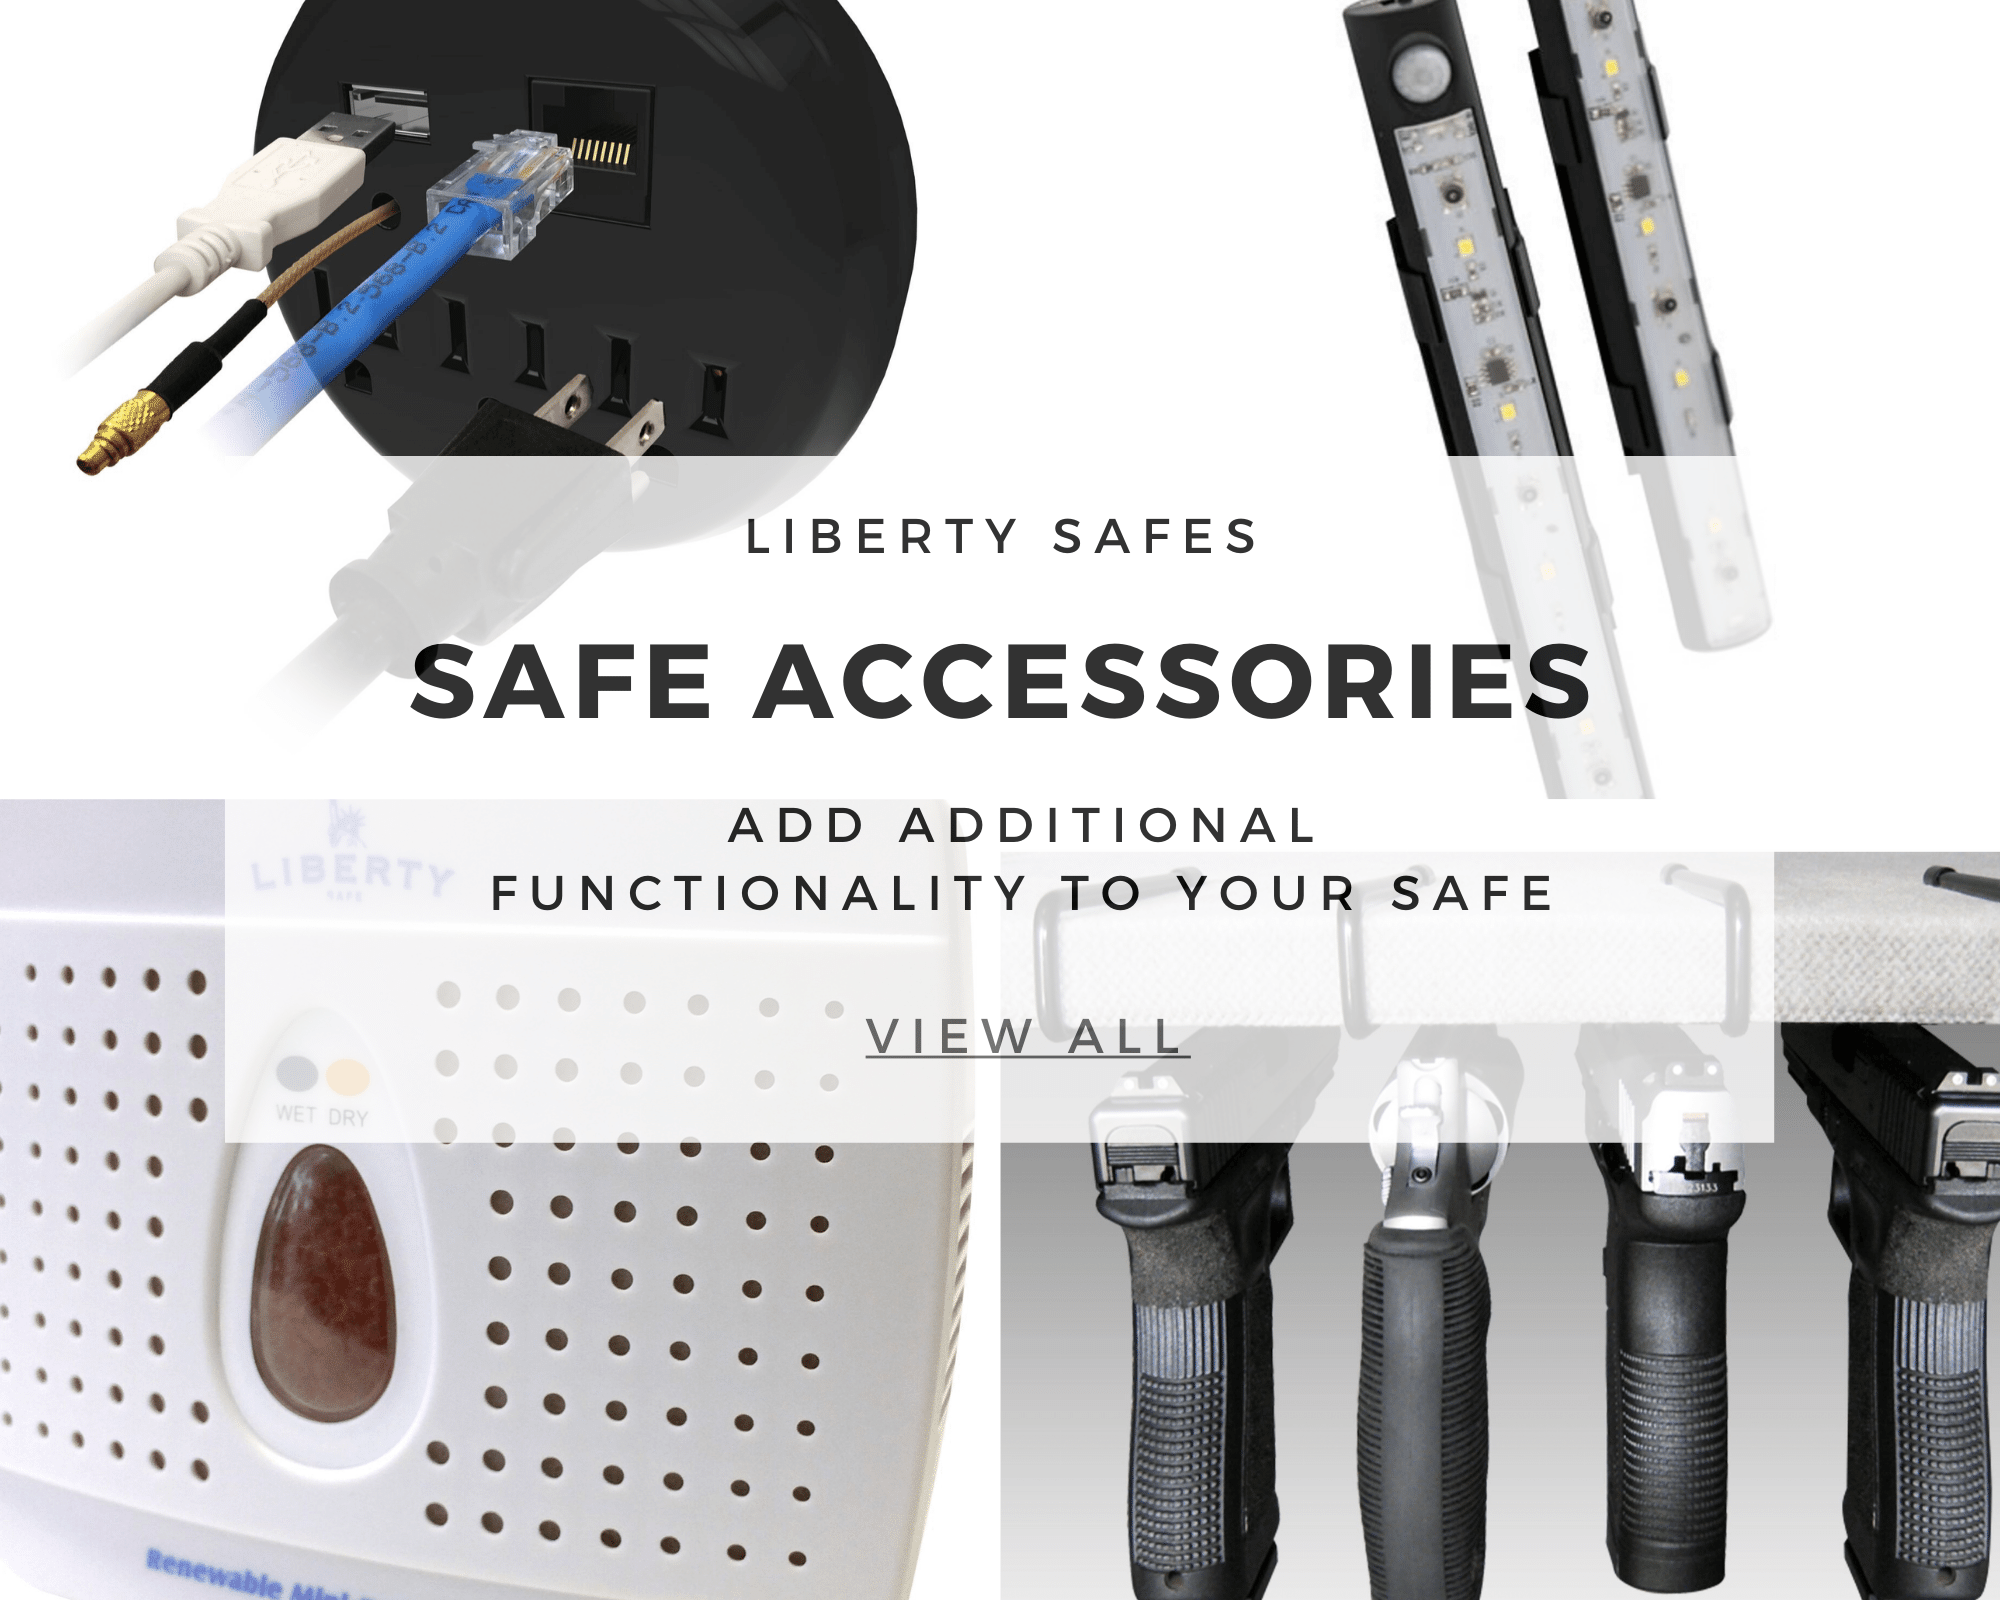 safe accessory text with pictures of dehumidifier, lights, outlet for safes